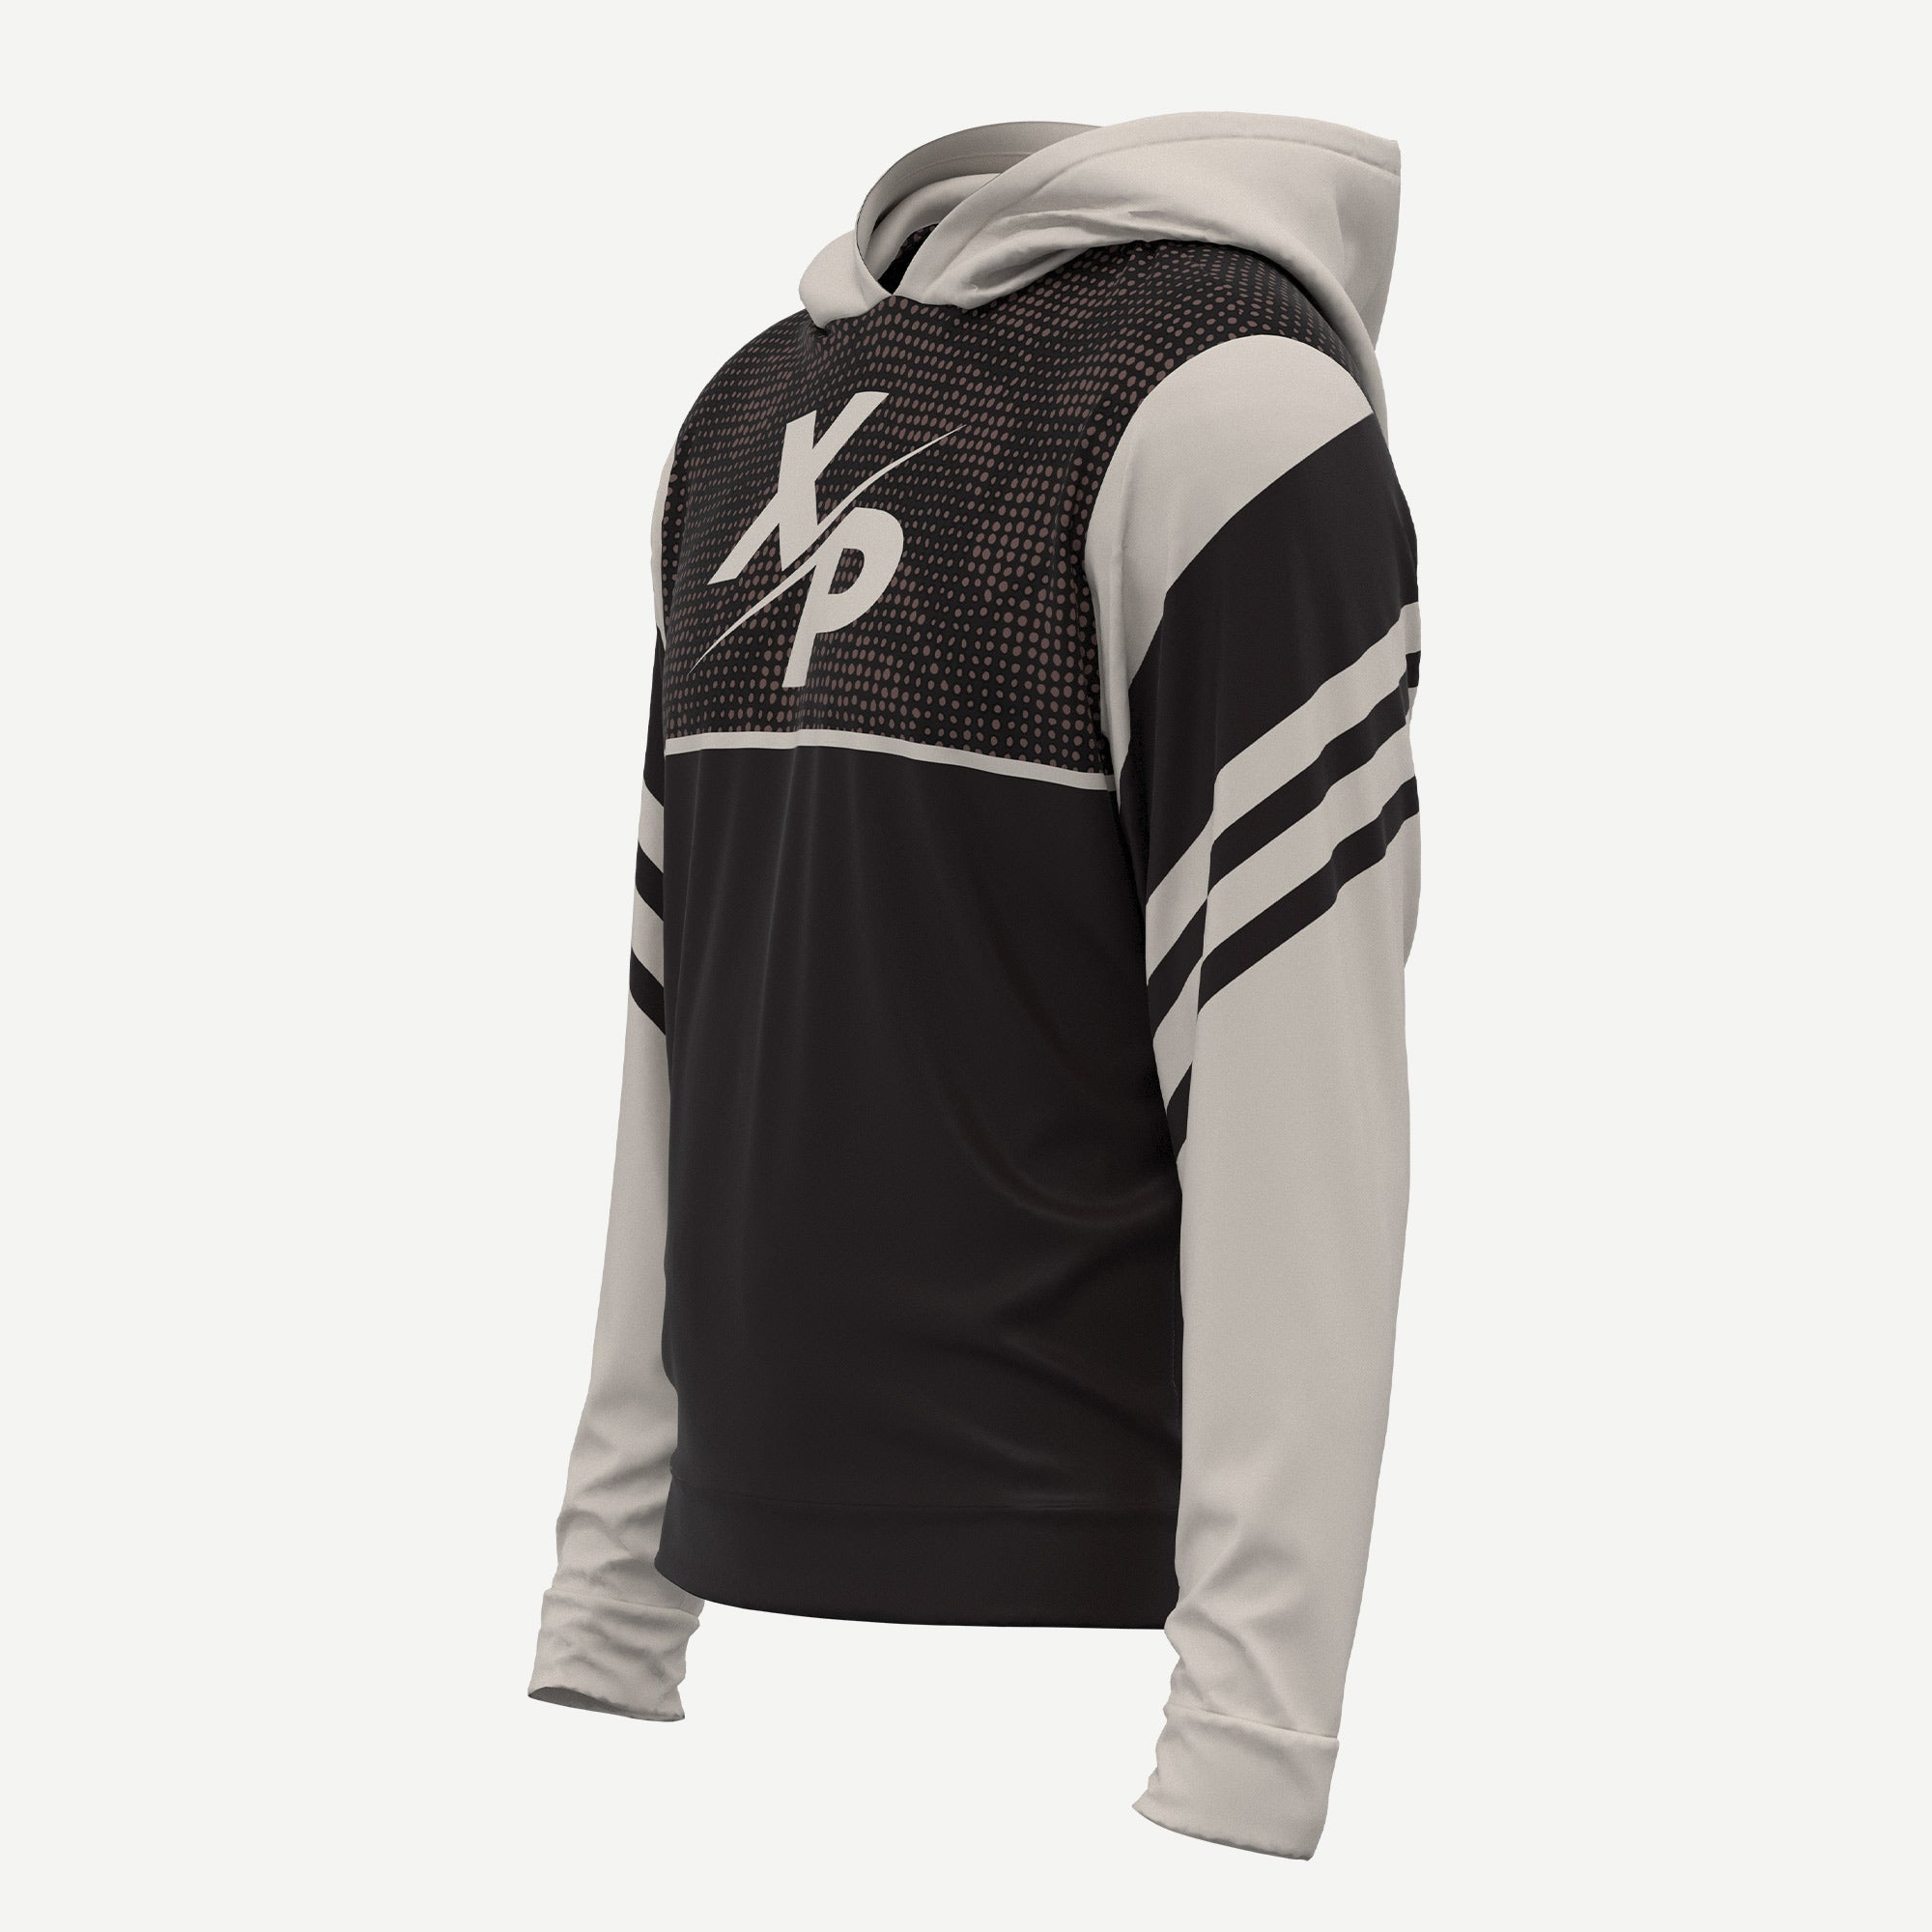 Half Tone X-P Star Super Soft Fully Sublimated Hoodie Xtreme Pro Apparel